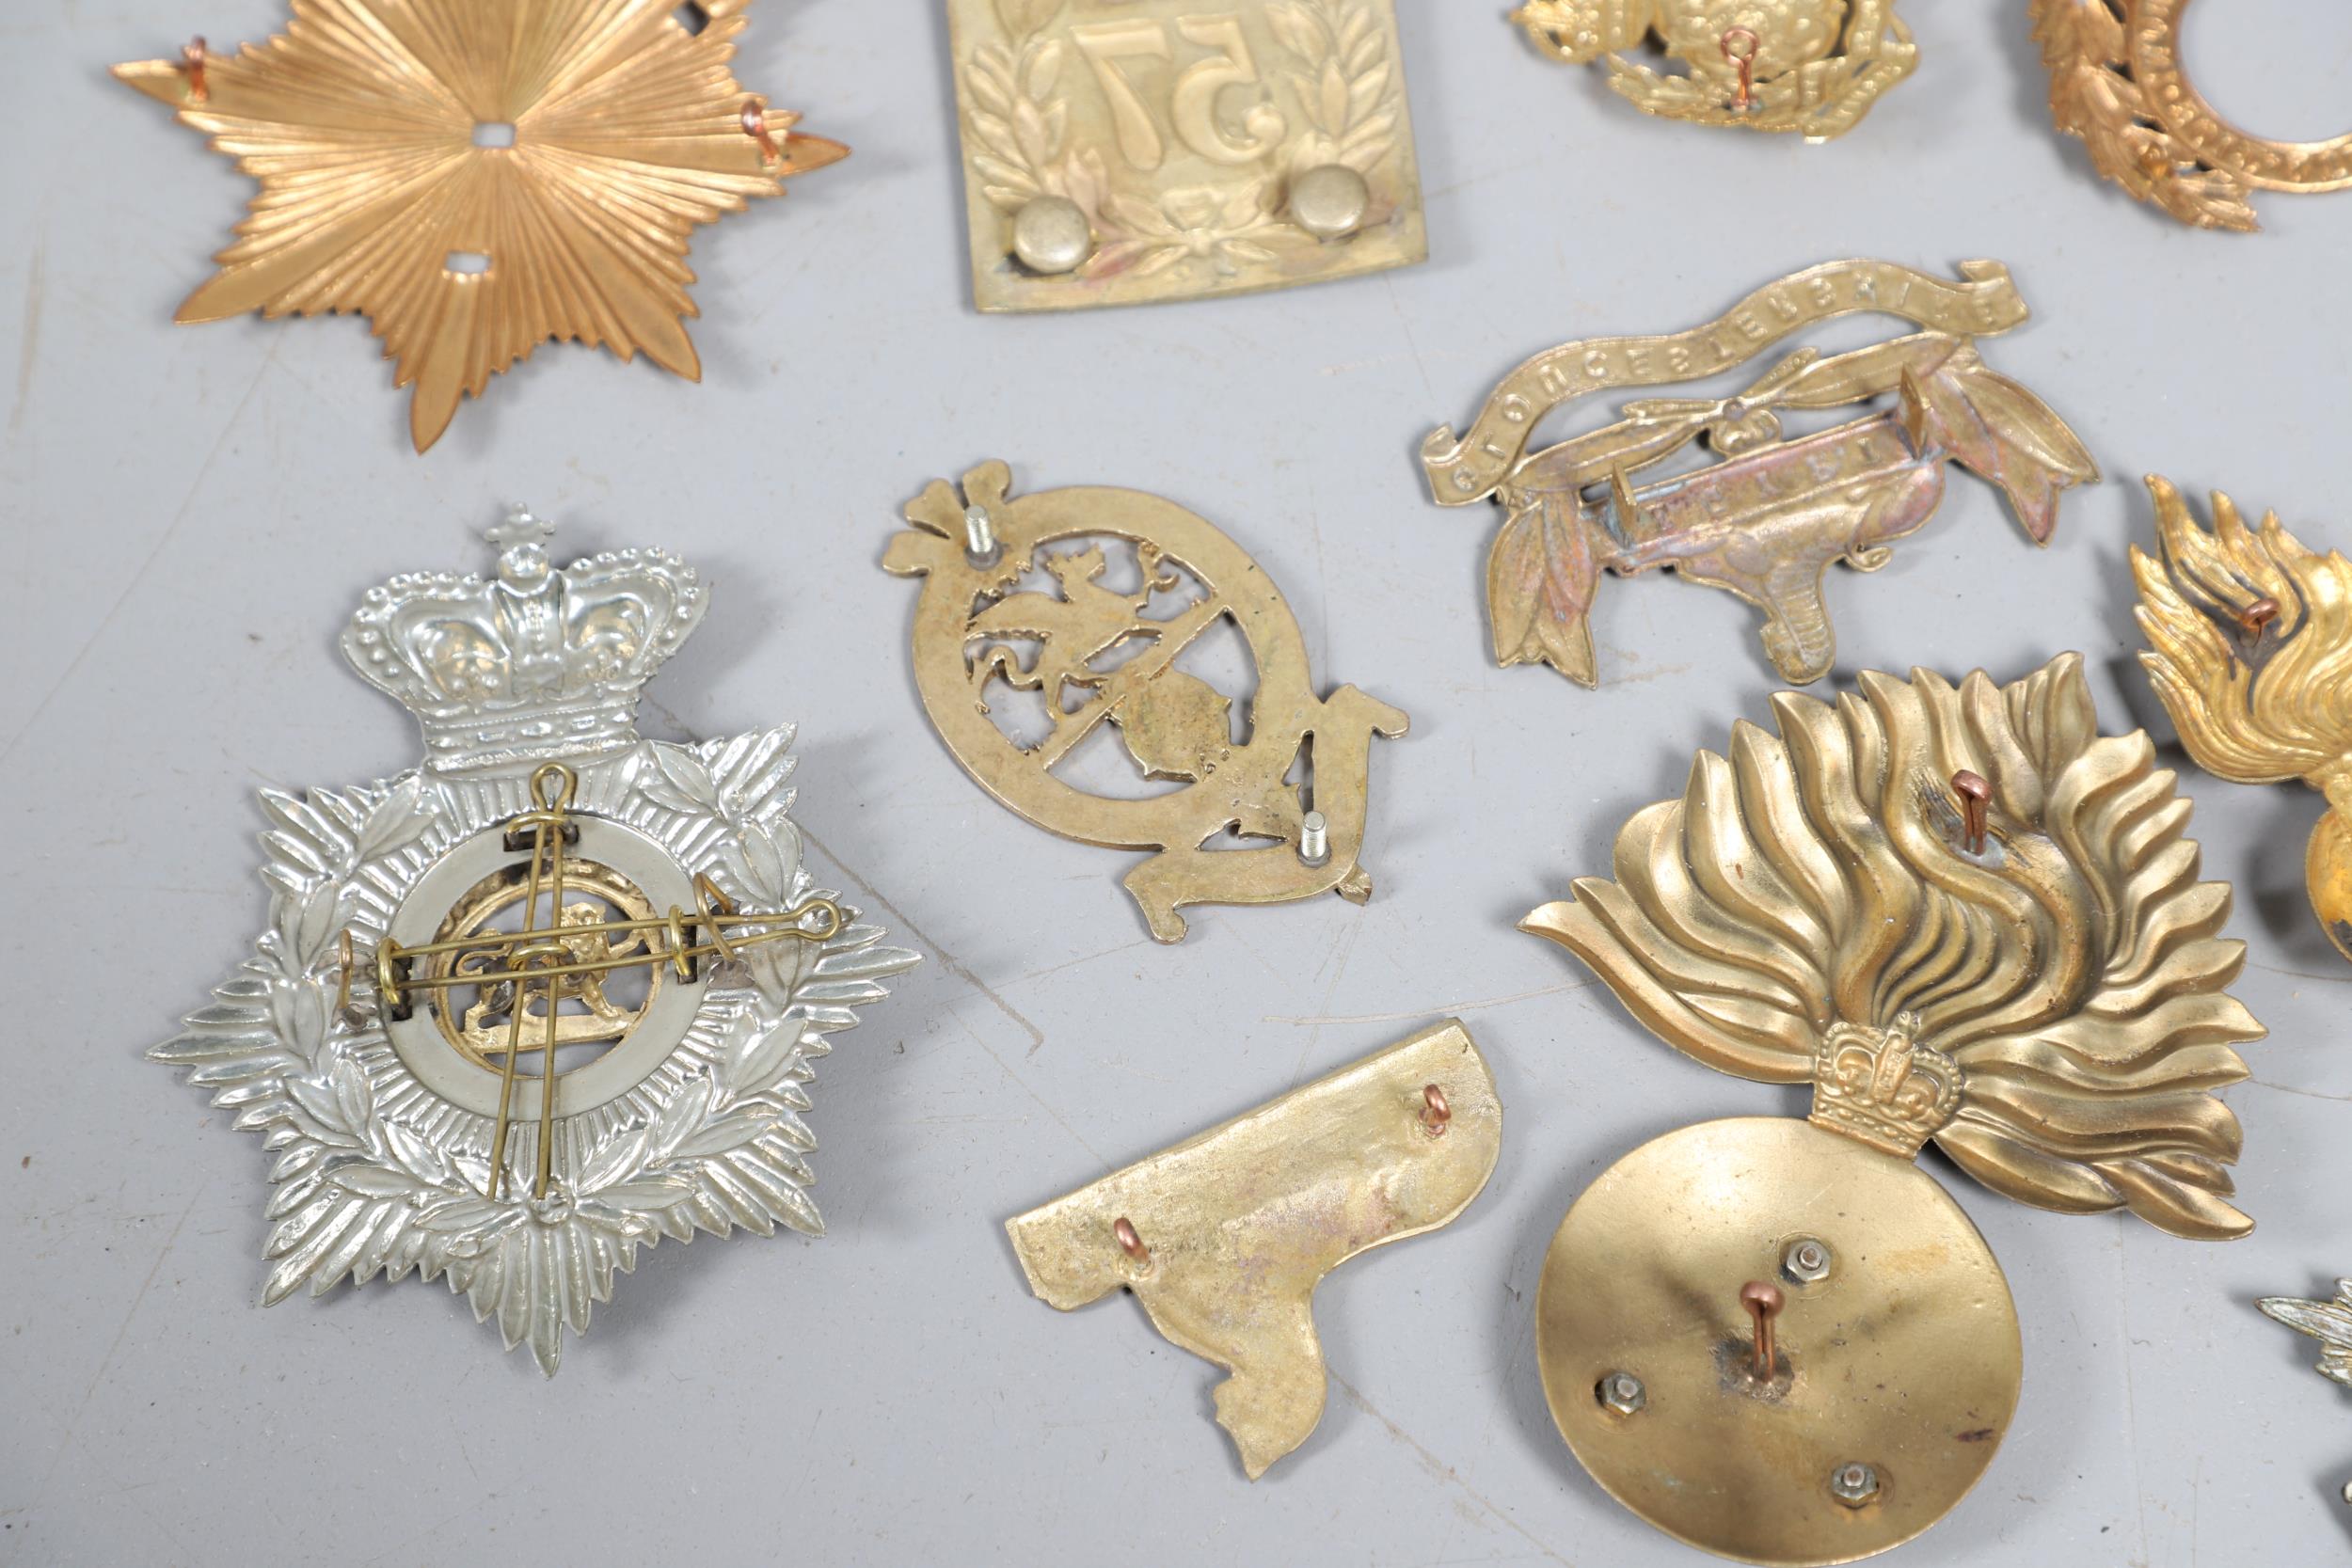 A COLLECTION OF VICTORIAN STYLE HELMET PLATES AND OTHER BADGES. - Image 10 of 10